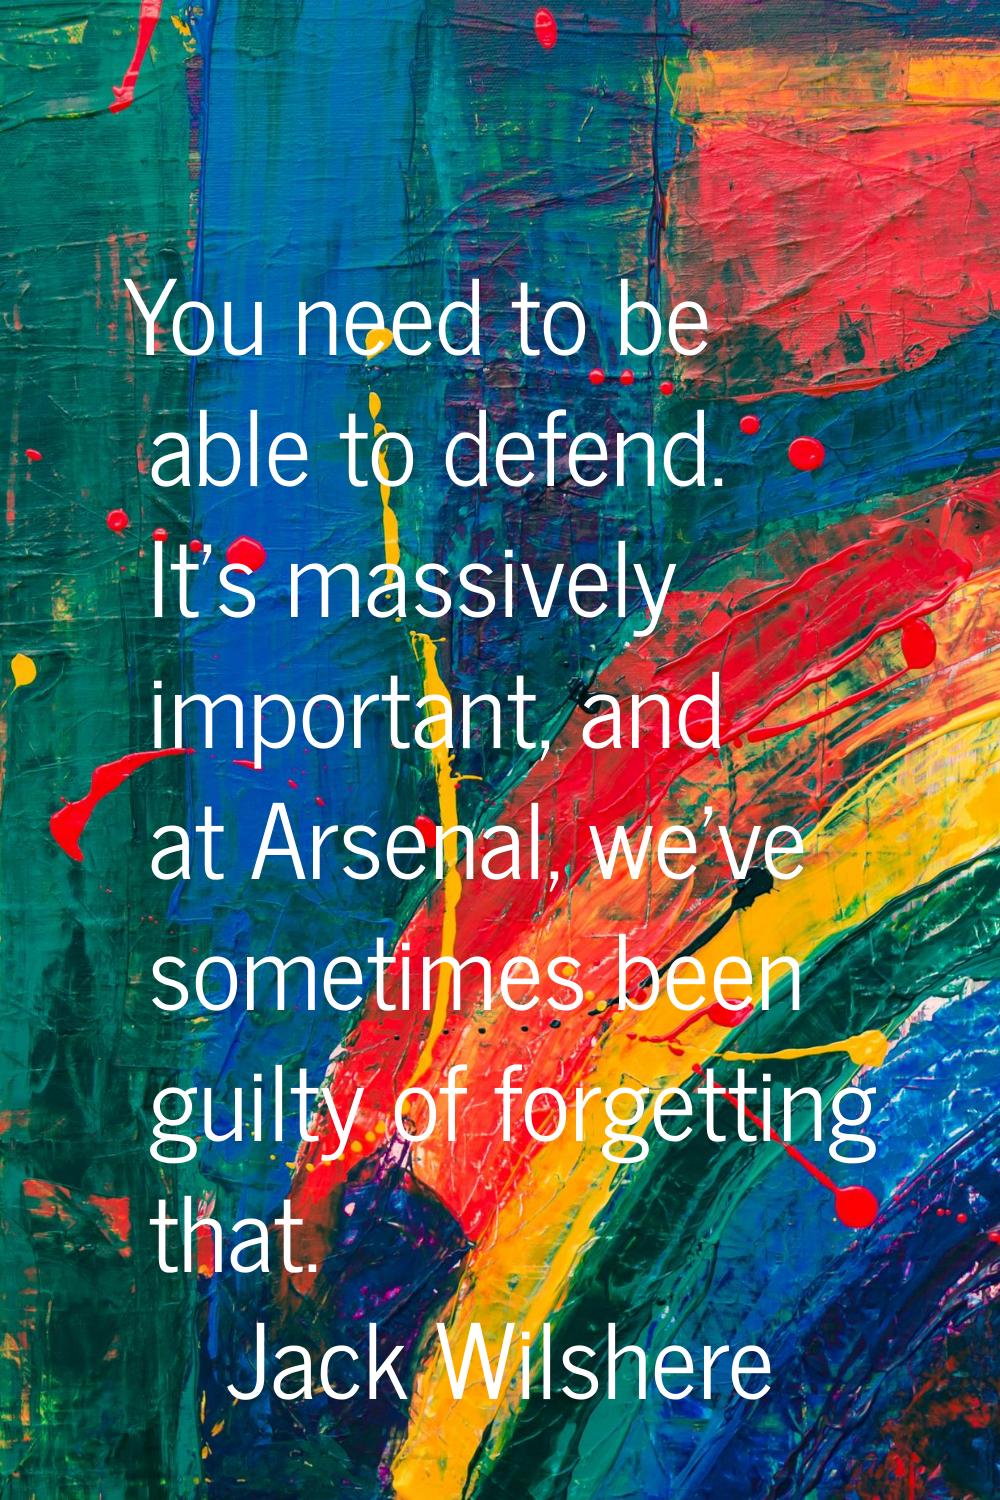 You need to be able to defend. It's massively important, and at Arsenal, we've sometimes been guilt